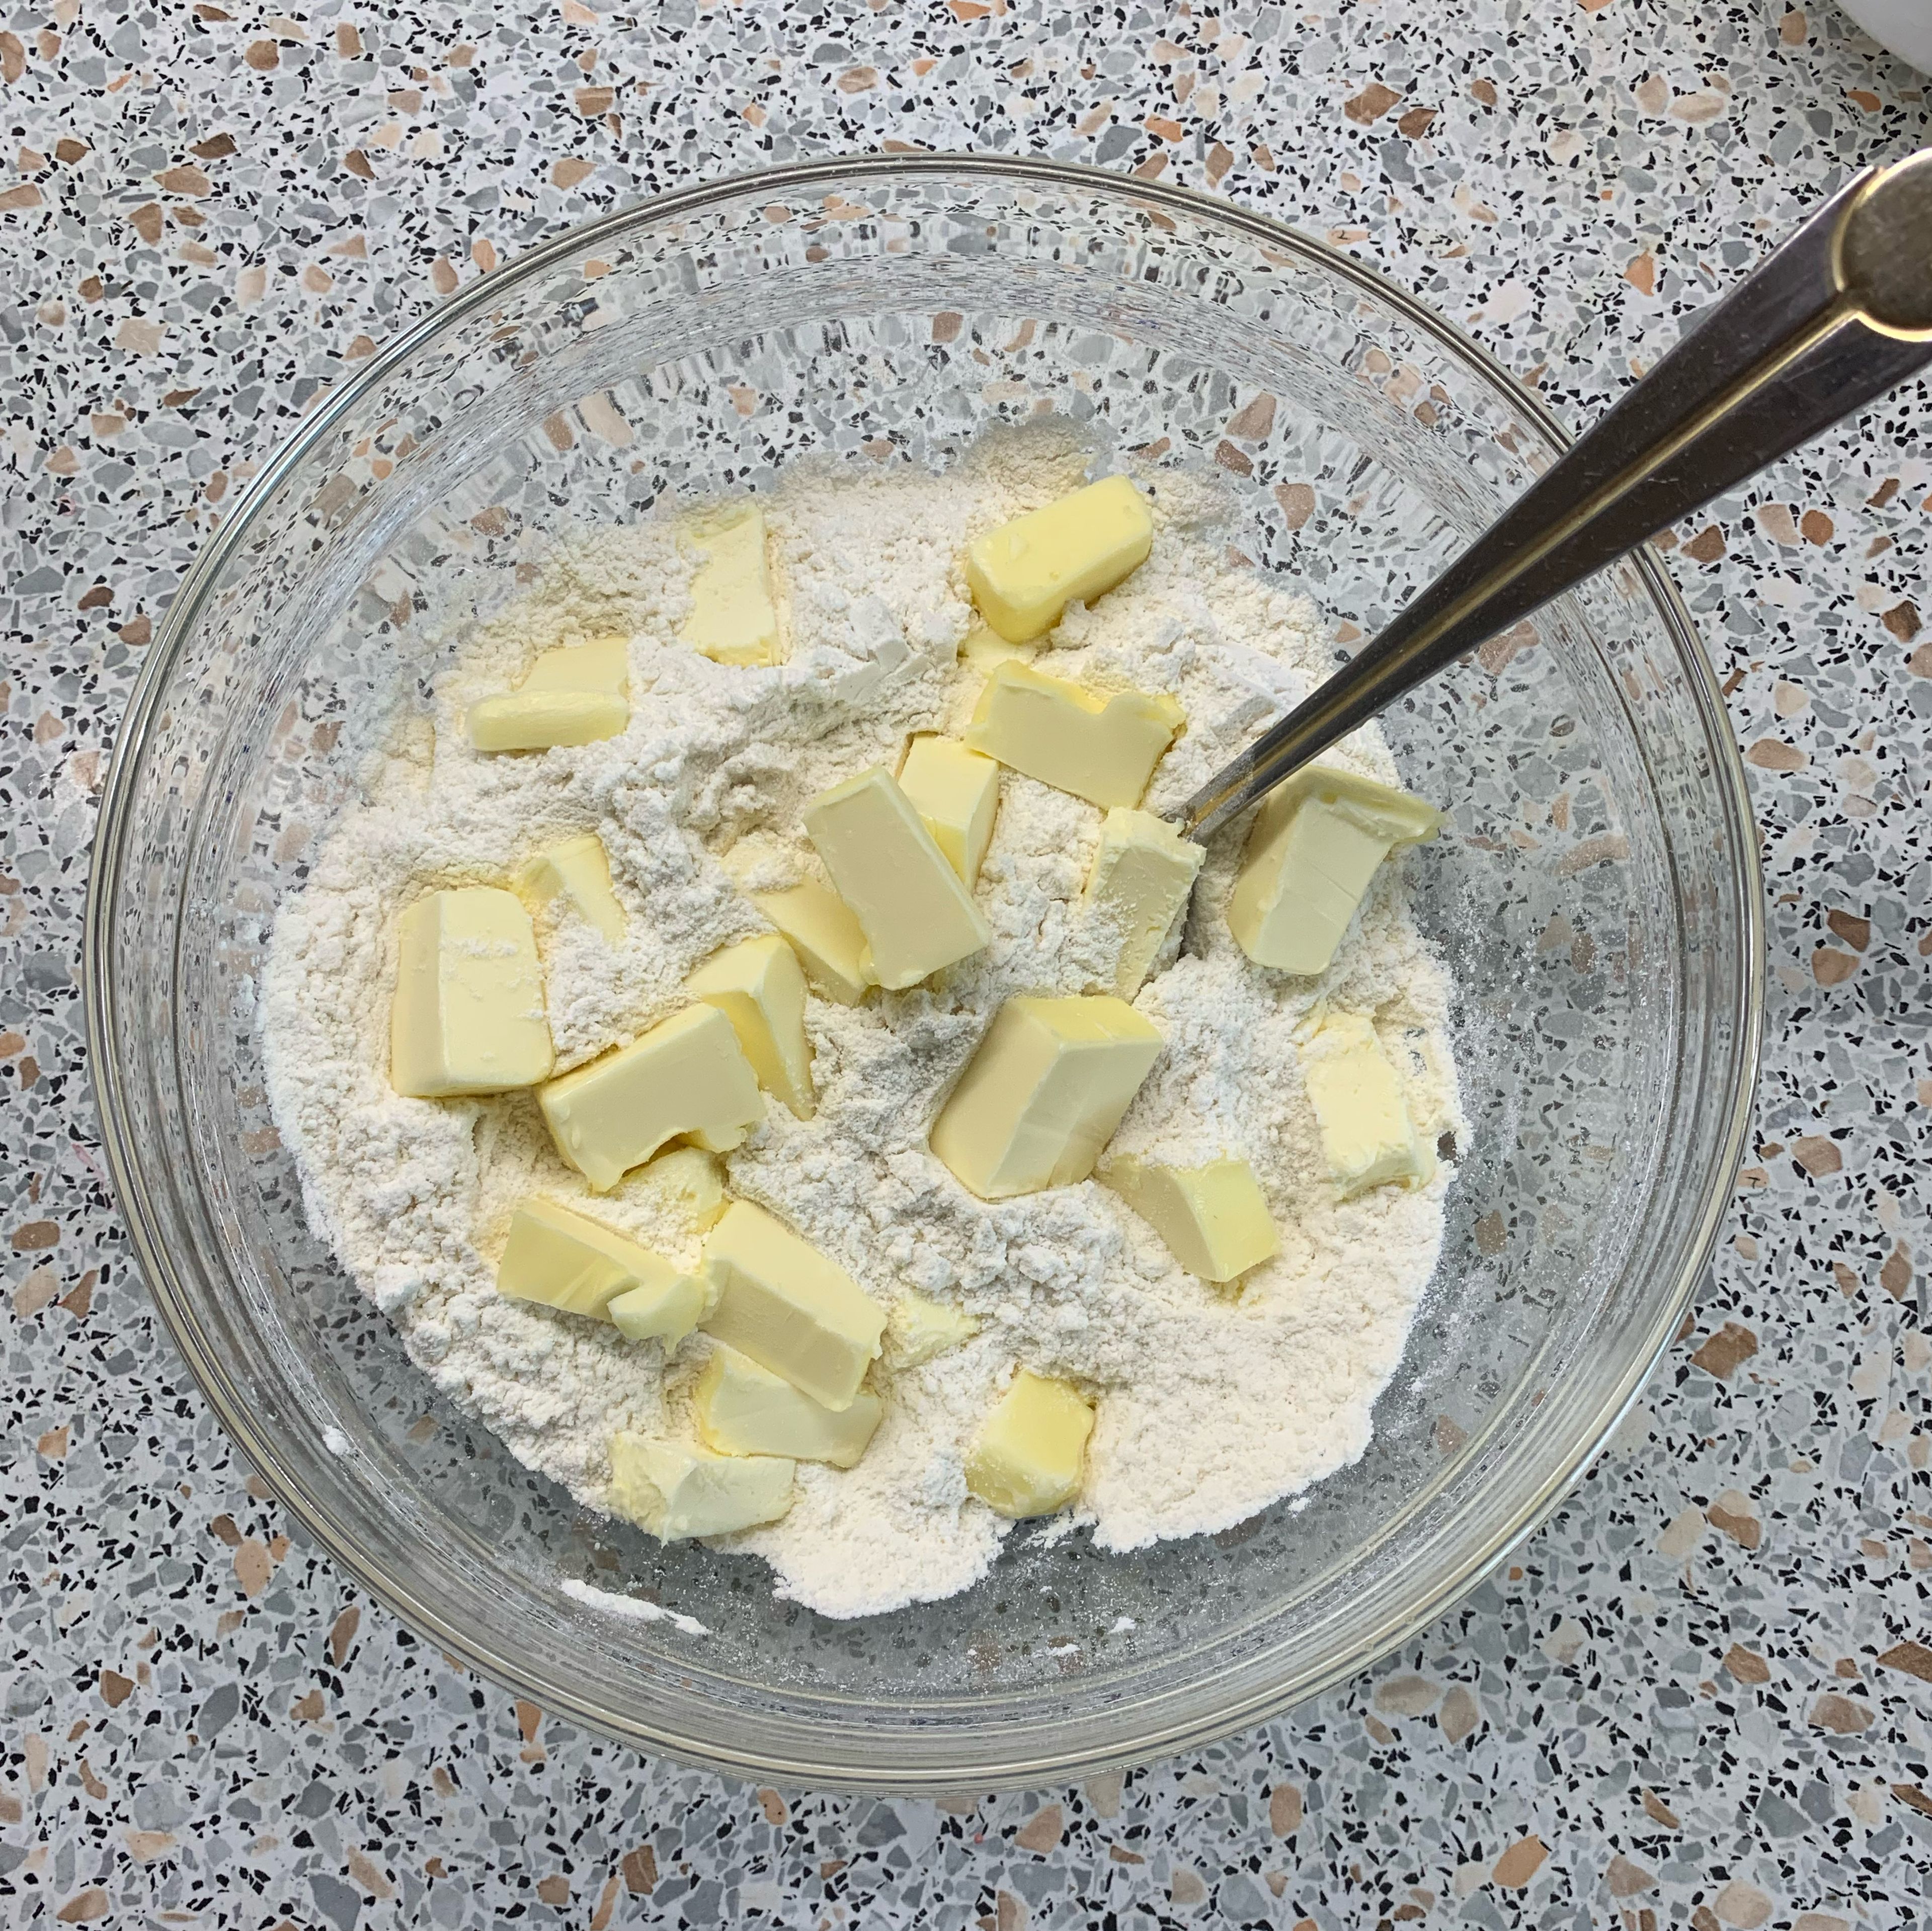 Mix dry ingredients with cool butter using your hands until crumbly. Then step by step add cold water. Form the dough in 2 balls (one is a bit bigger)